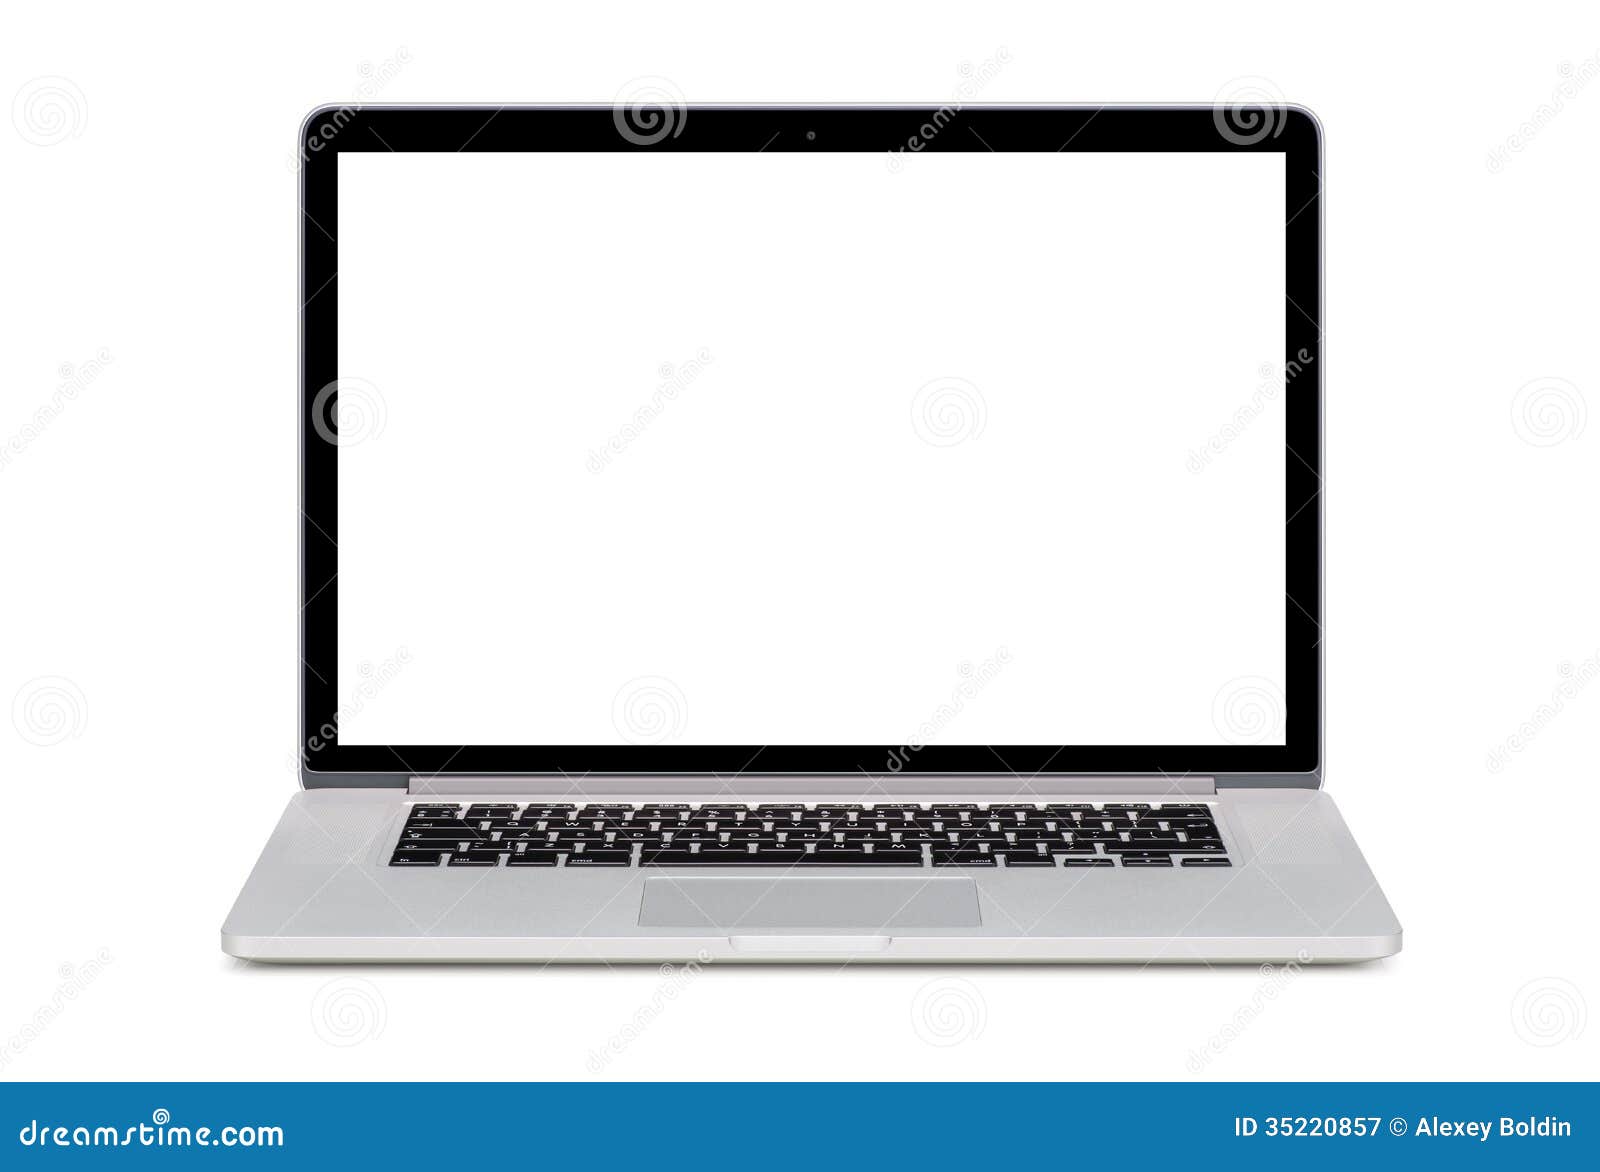 front view of a modern laptop with a white screen and an english